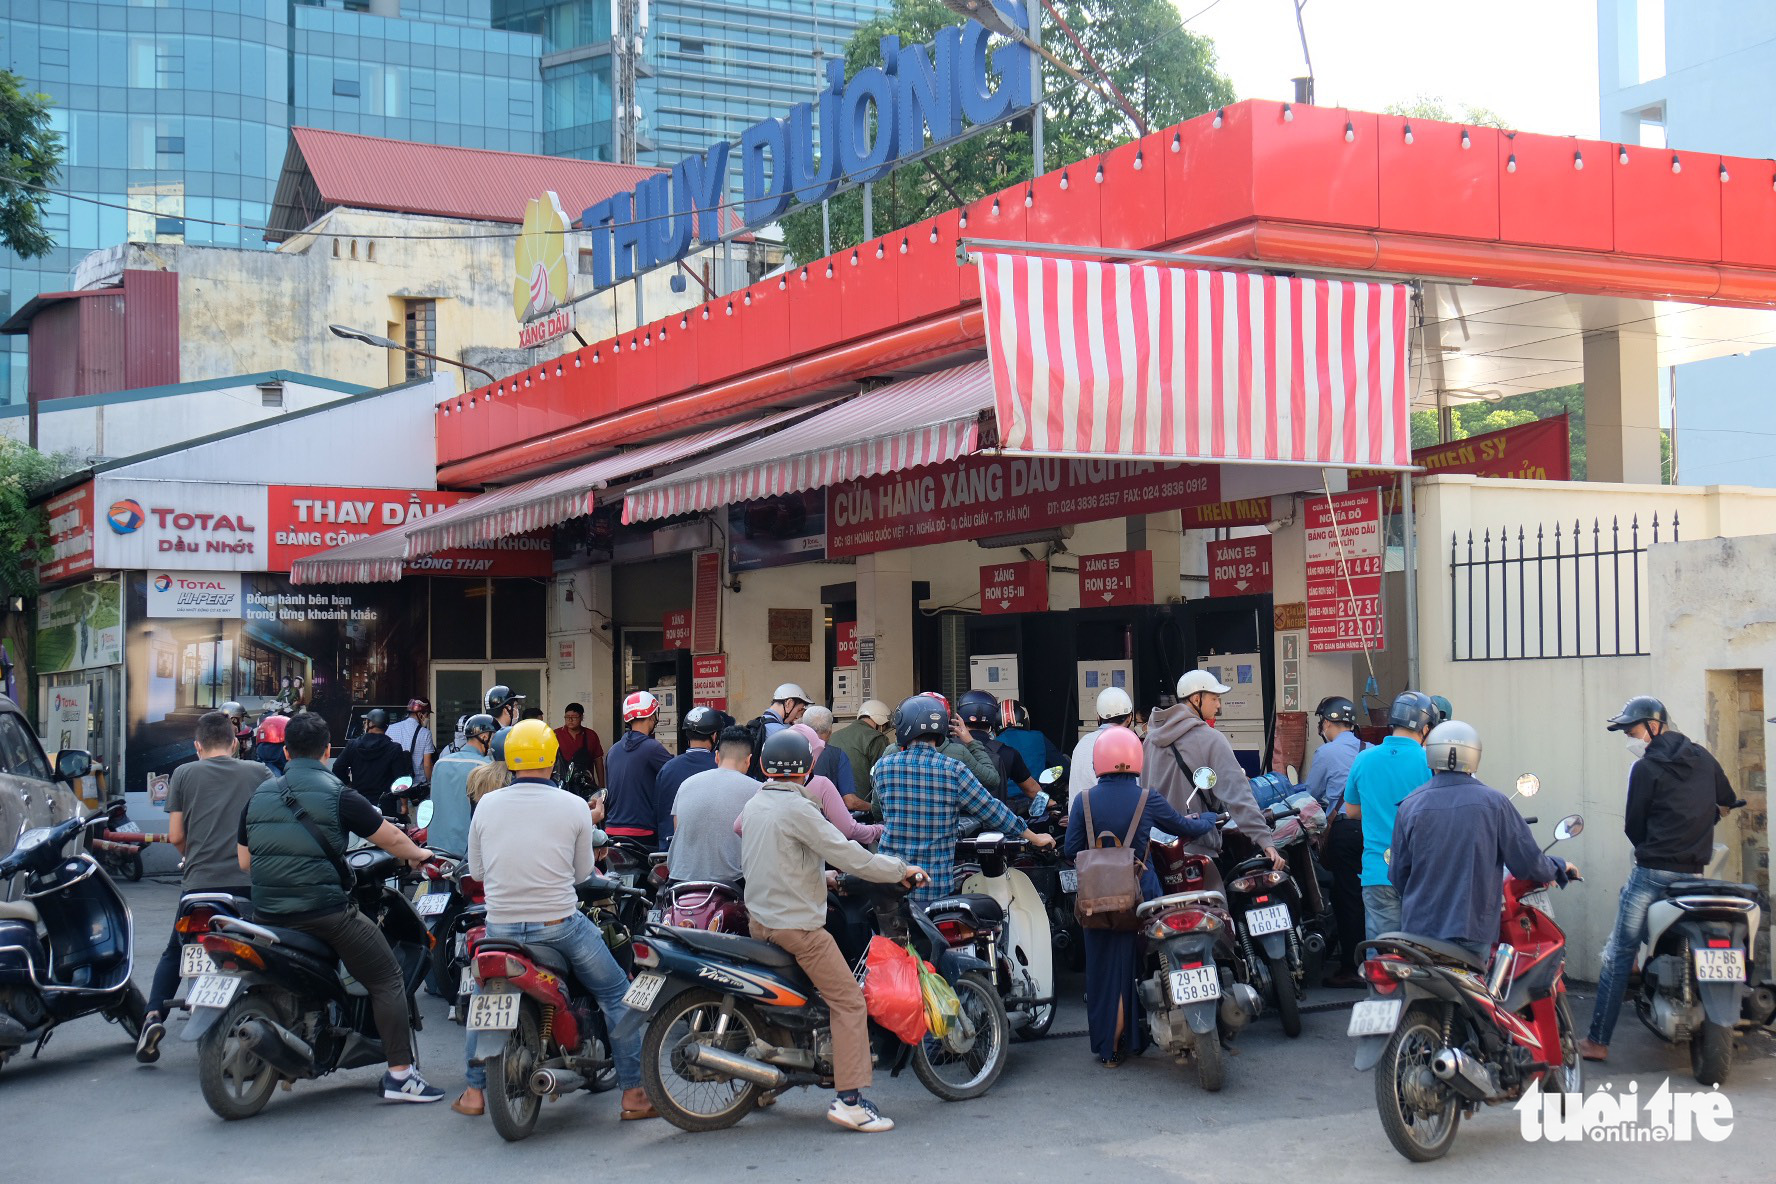 People line up in front of a filling station in Hanoi, October 11, 2022. Photo: Nguyen Bao / Tuoi Tre